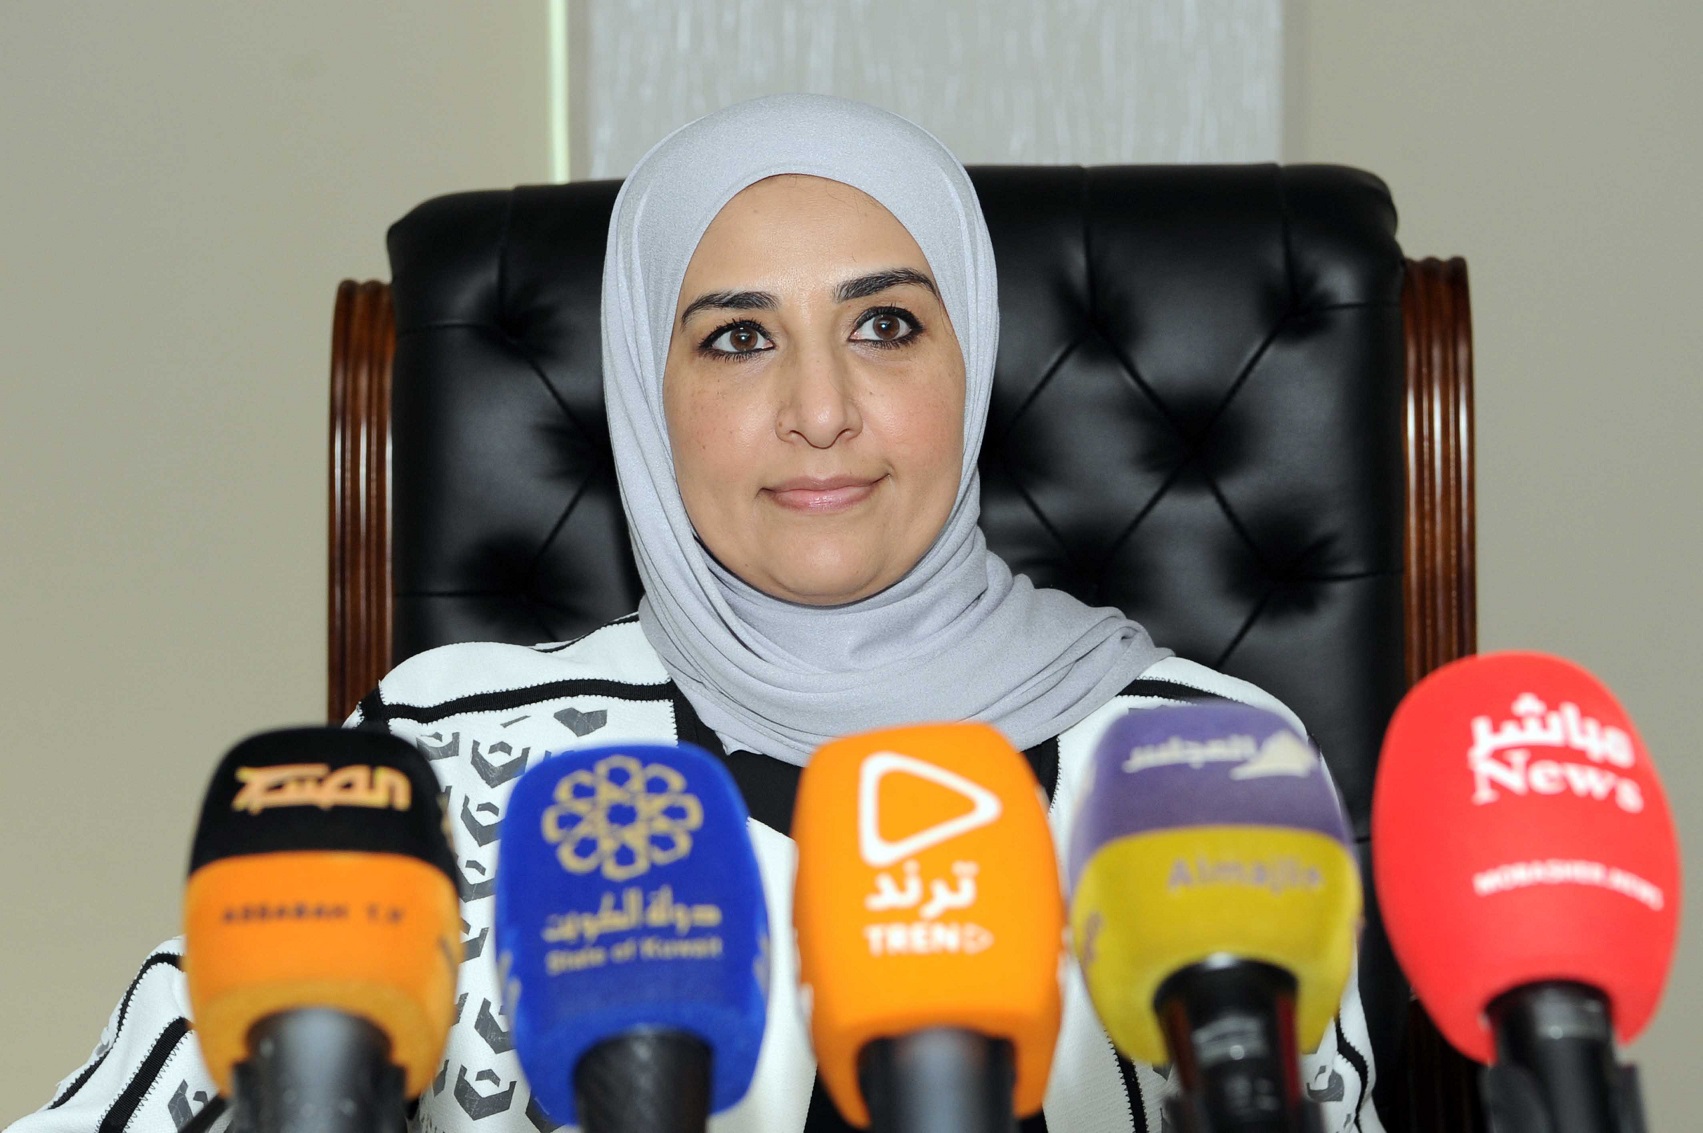 Cooperative societies to continue services during full curfew - Min. Al-Aqeel                                                                                                                                                                             